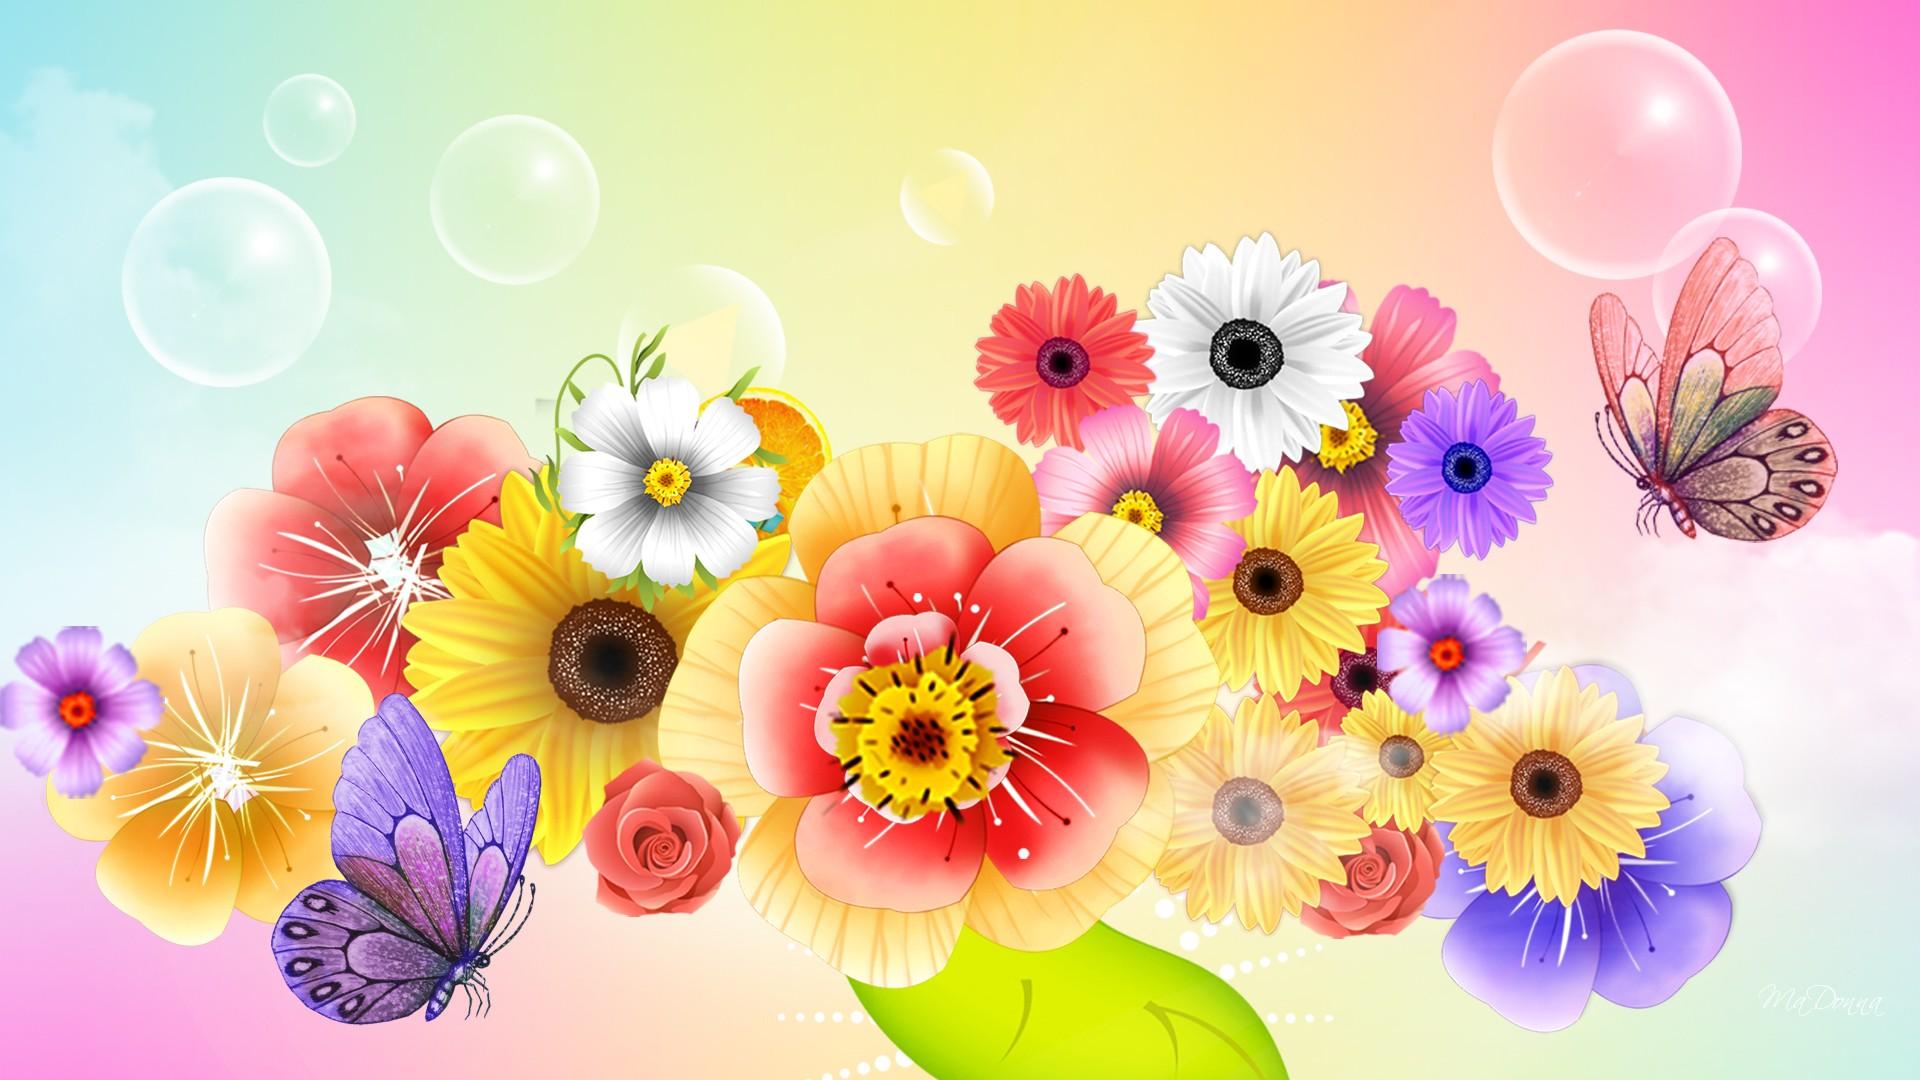 HD desktop wallpaper: Flower, Butterfly, Colorful, Spring, Artistic, Bubble download free picture